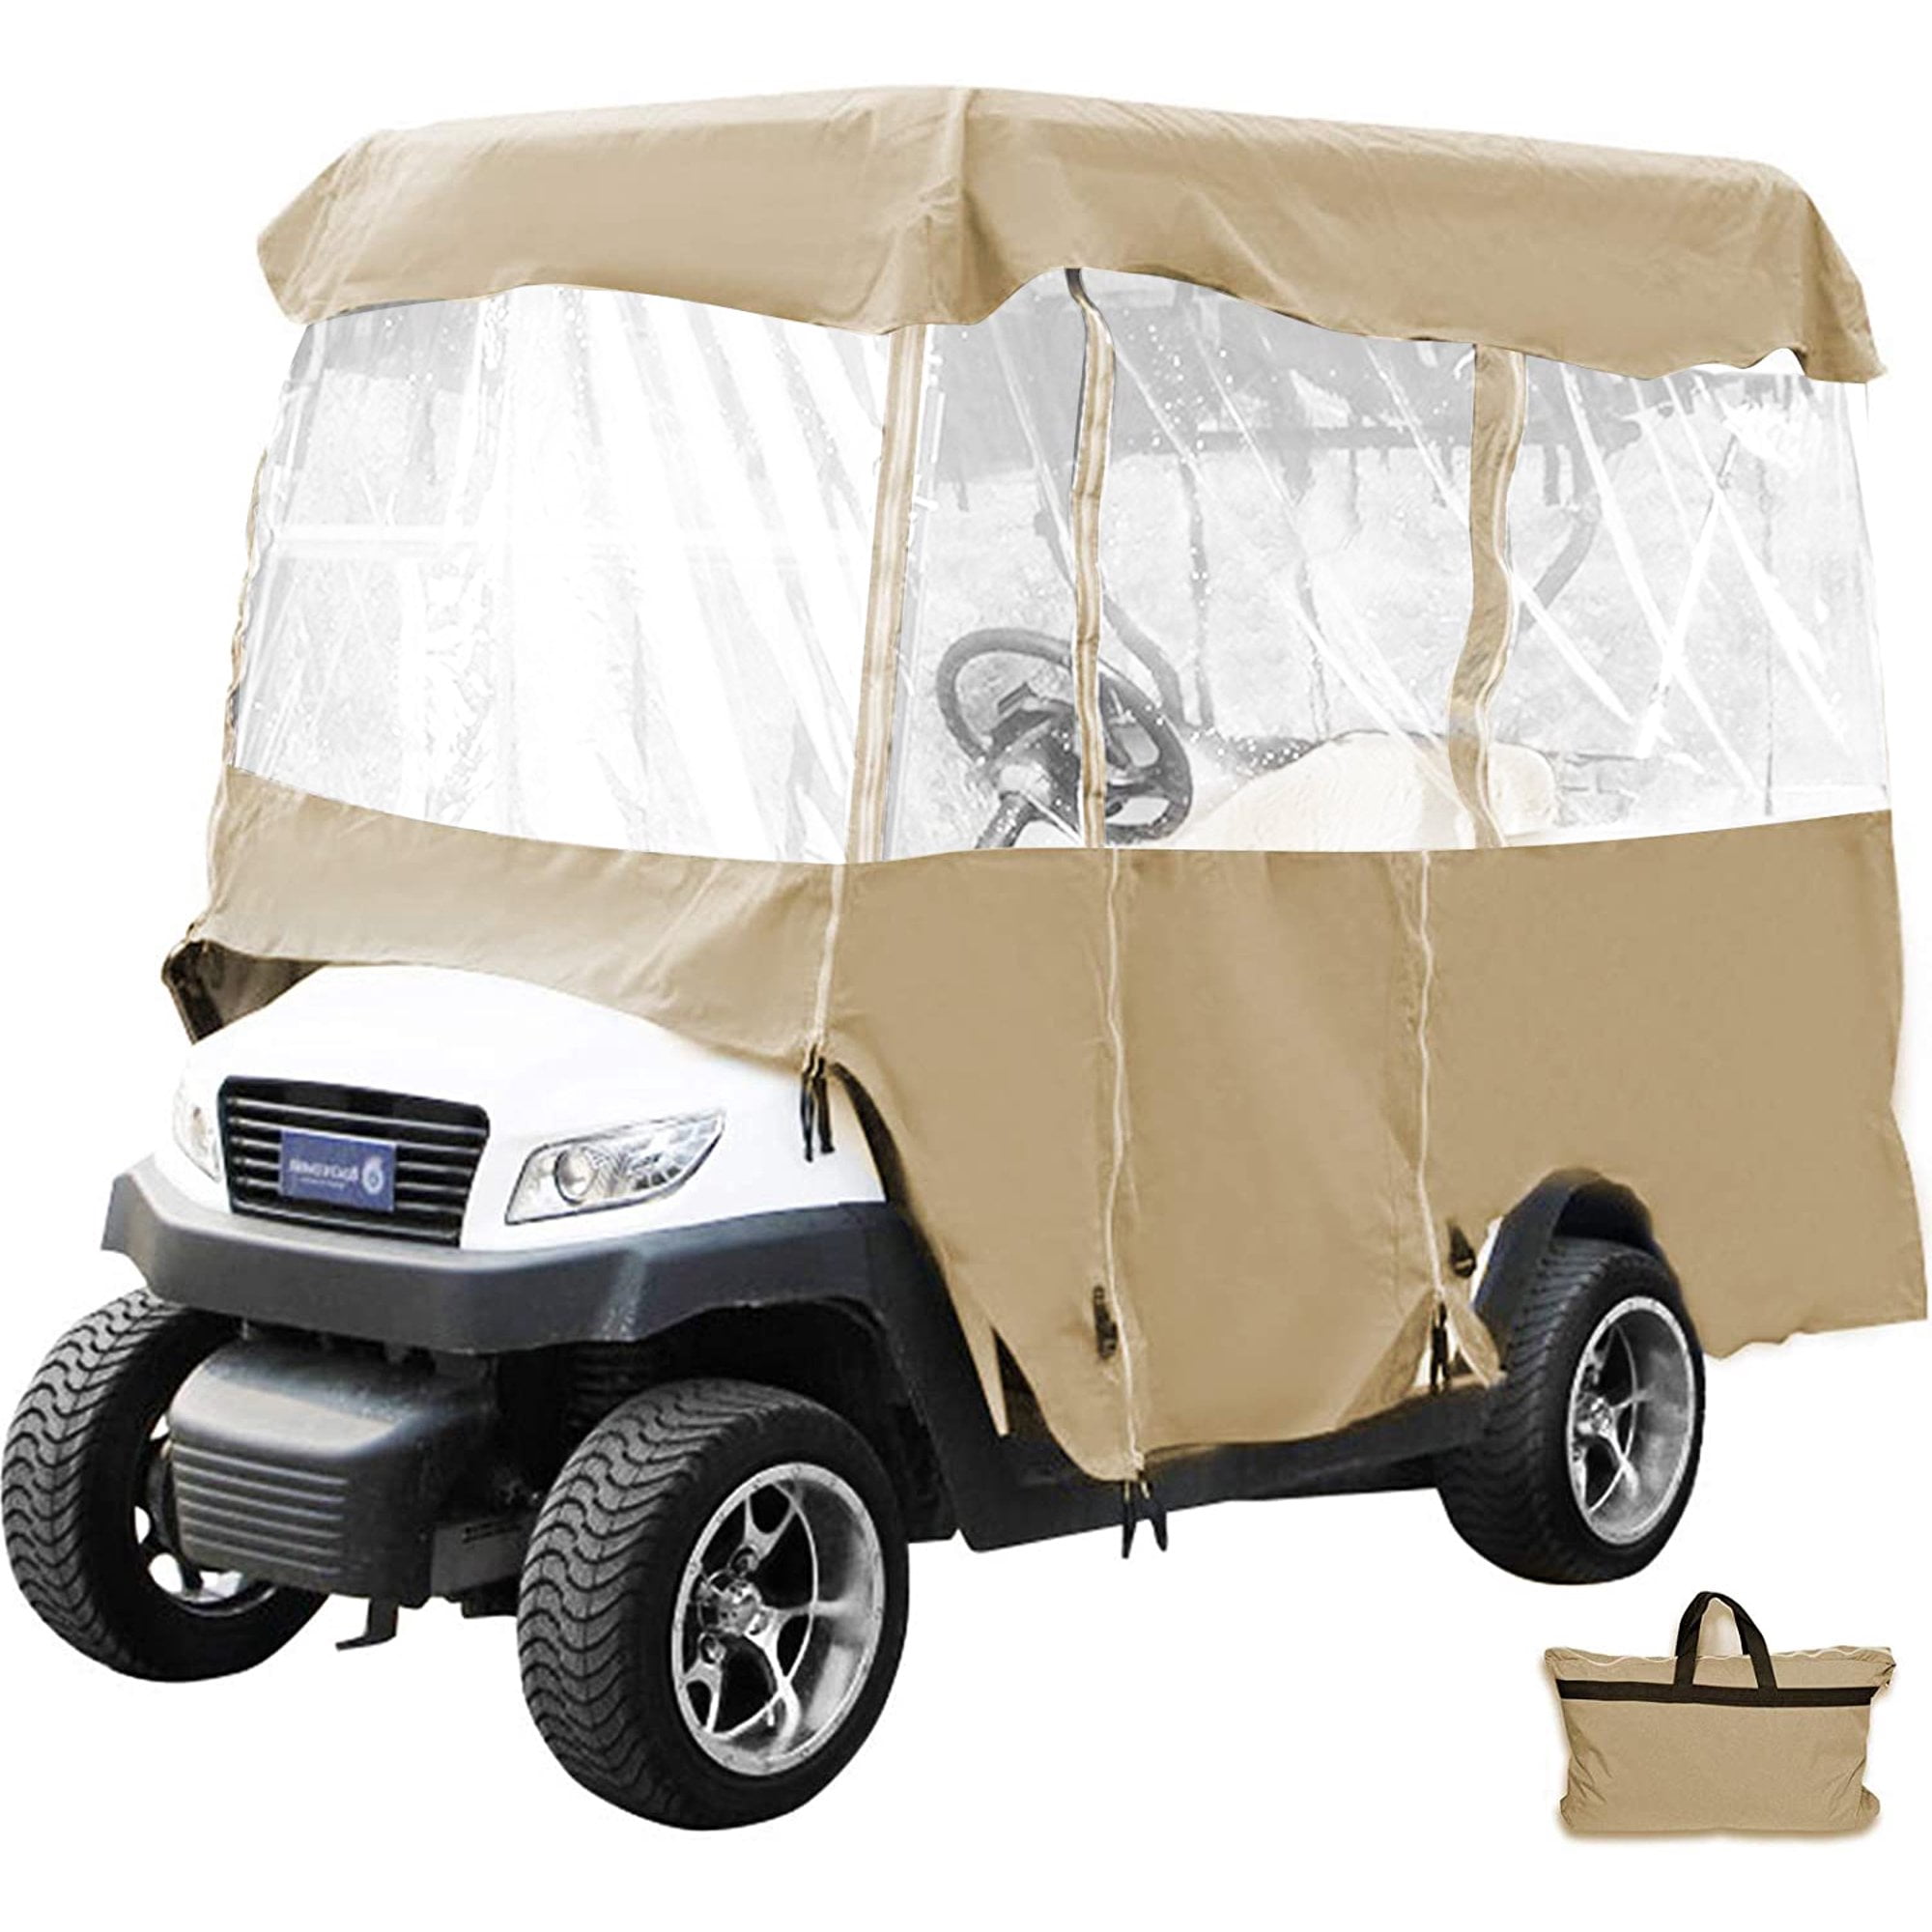 VEVORbrand Golf Cart Enclosure, 4 Person Golf Cart Cover, 4 Sided Fairway  Deluxe, 300D Waterproof Driving Enclosure with Transparent Windows, Fit for  EZGO, Club Car, Yamaha Cart, Roof Up to 78.7''L - Walmart.com